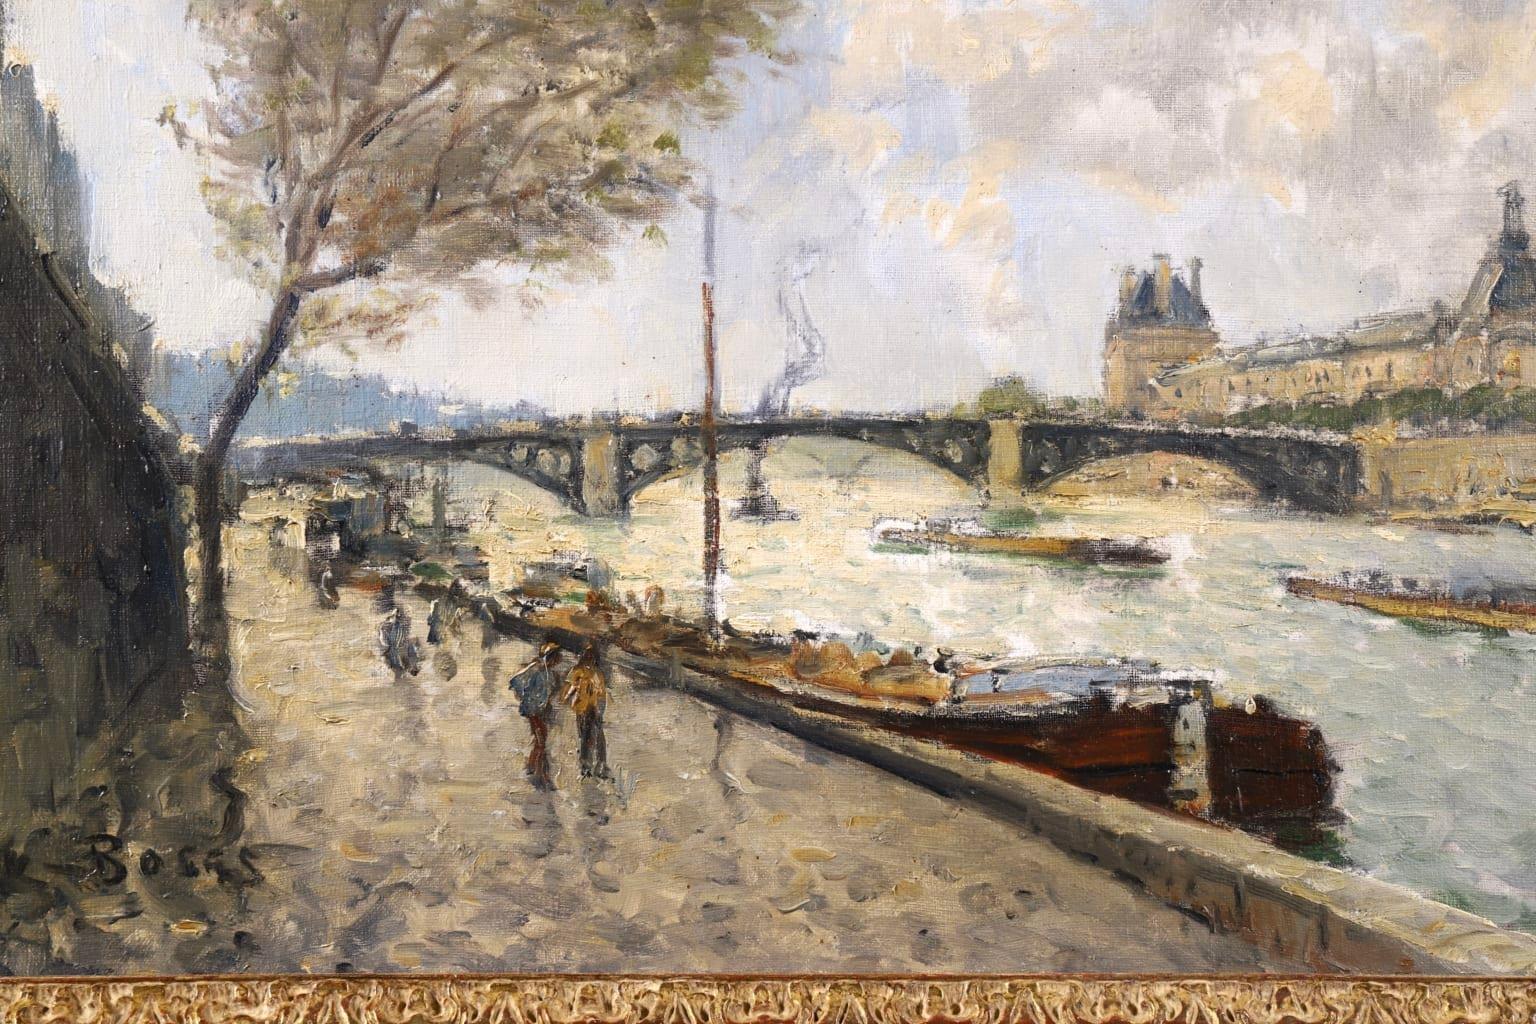 View of the Seine, Paris - Impressionist Oil, Riverscape by Frank Myers Boggs 2